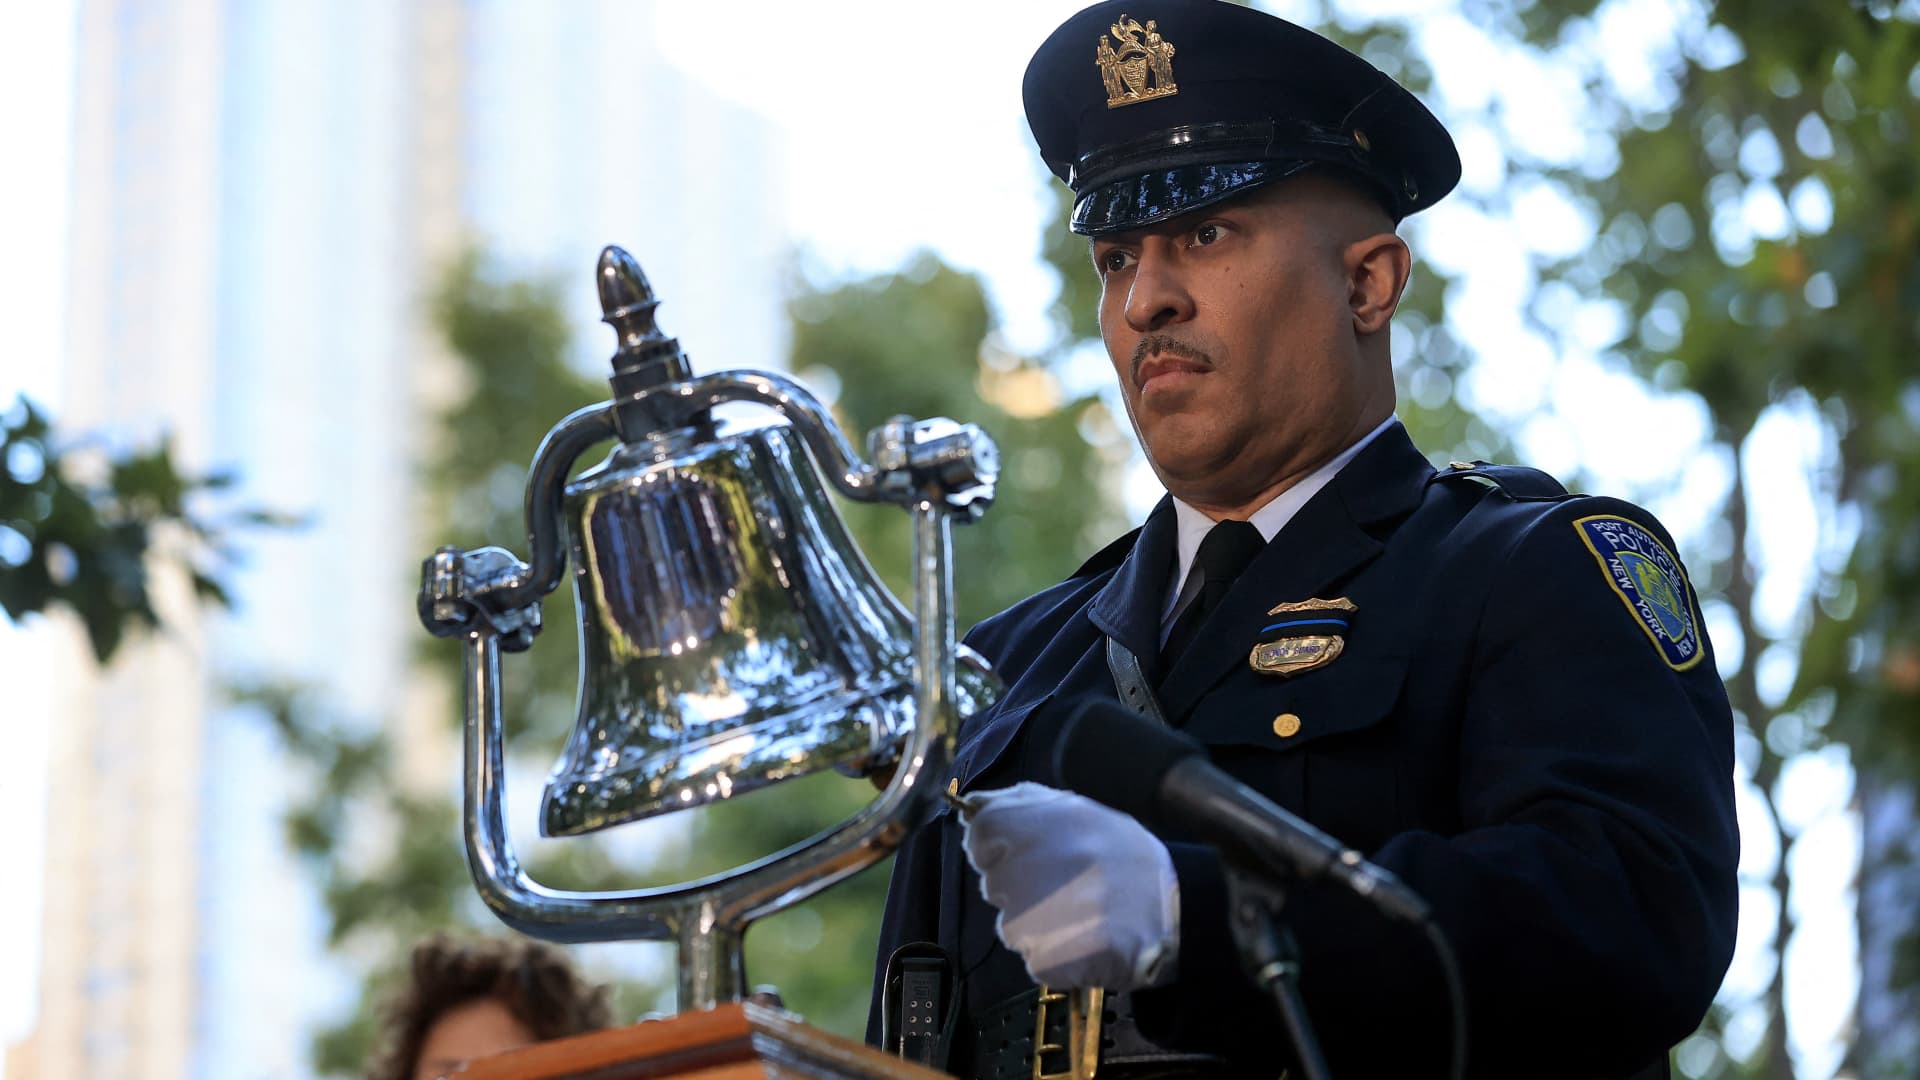 A bell is rung during a moment of silence during the annual 9/11 Commemoration Ceremony at the National 9/11 Memorial and Museum on September 11, 2021 in New York.